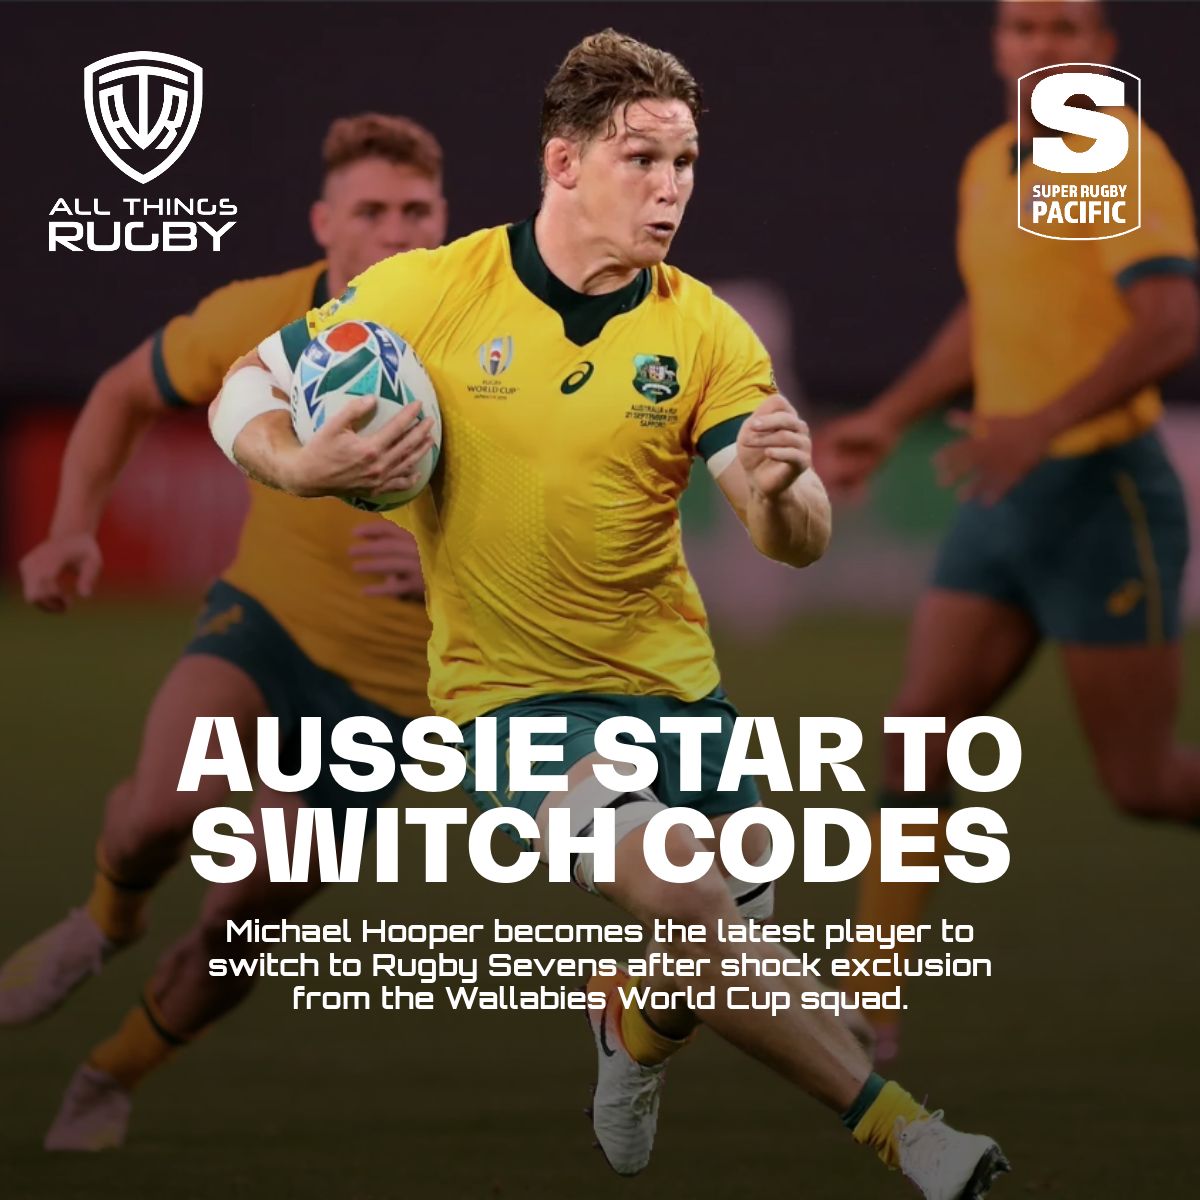 Michael Hooper becomes the latest player to switch to Rugby Sevens after captaining the Wallabies a record of 69 times calling an end to his 11-year 15's Career with Australia Rugby. 

#Hooper #RugbySevens #Rugby #RugbyAU #AustralianRugby #Wallabies #HSBCSVNS #SVNS